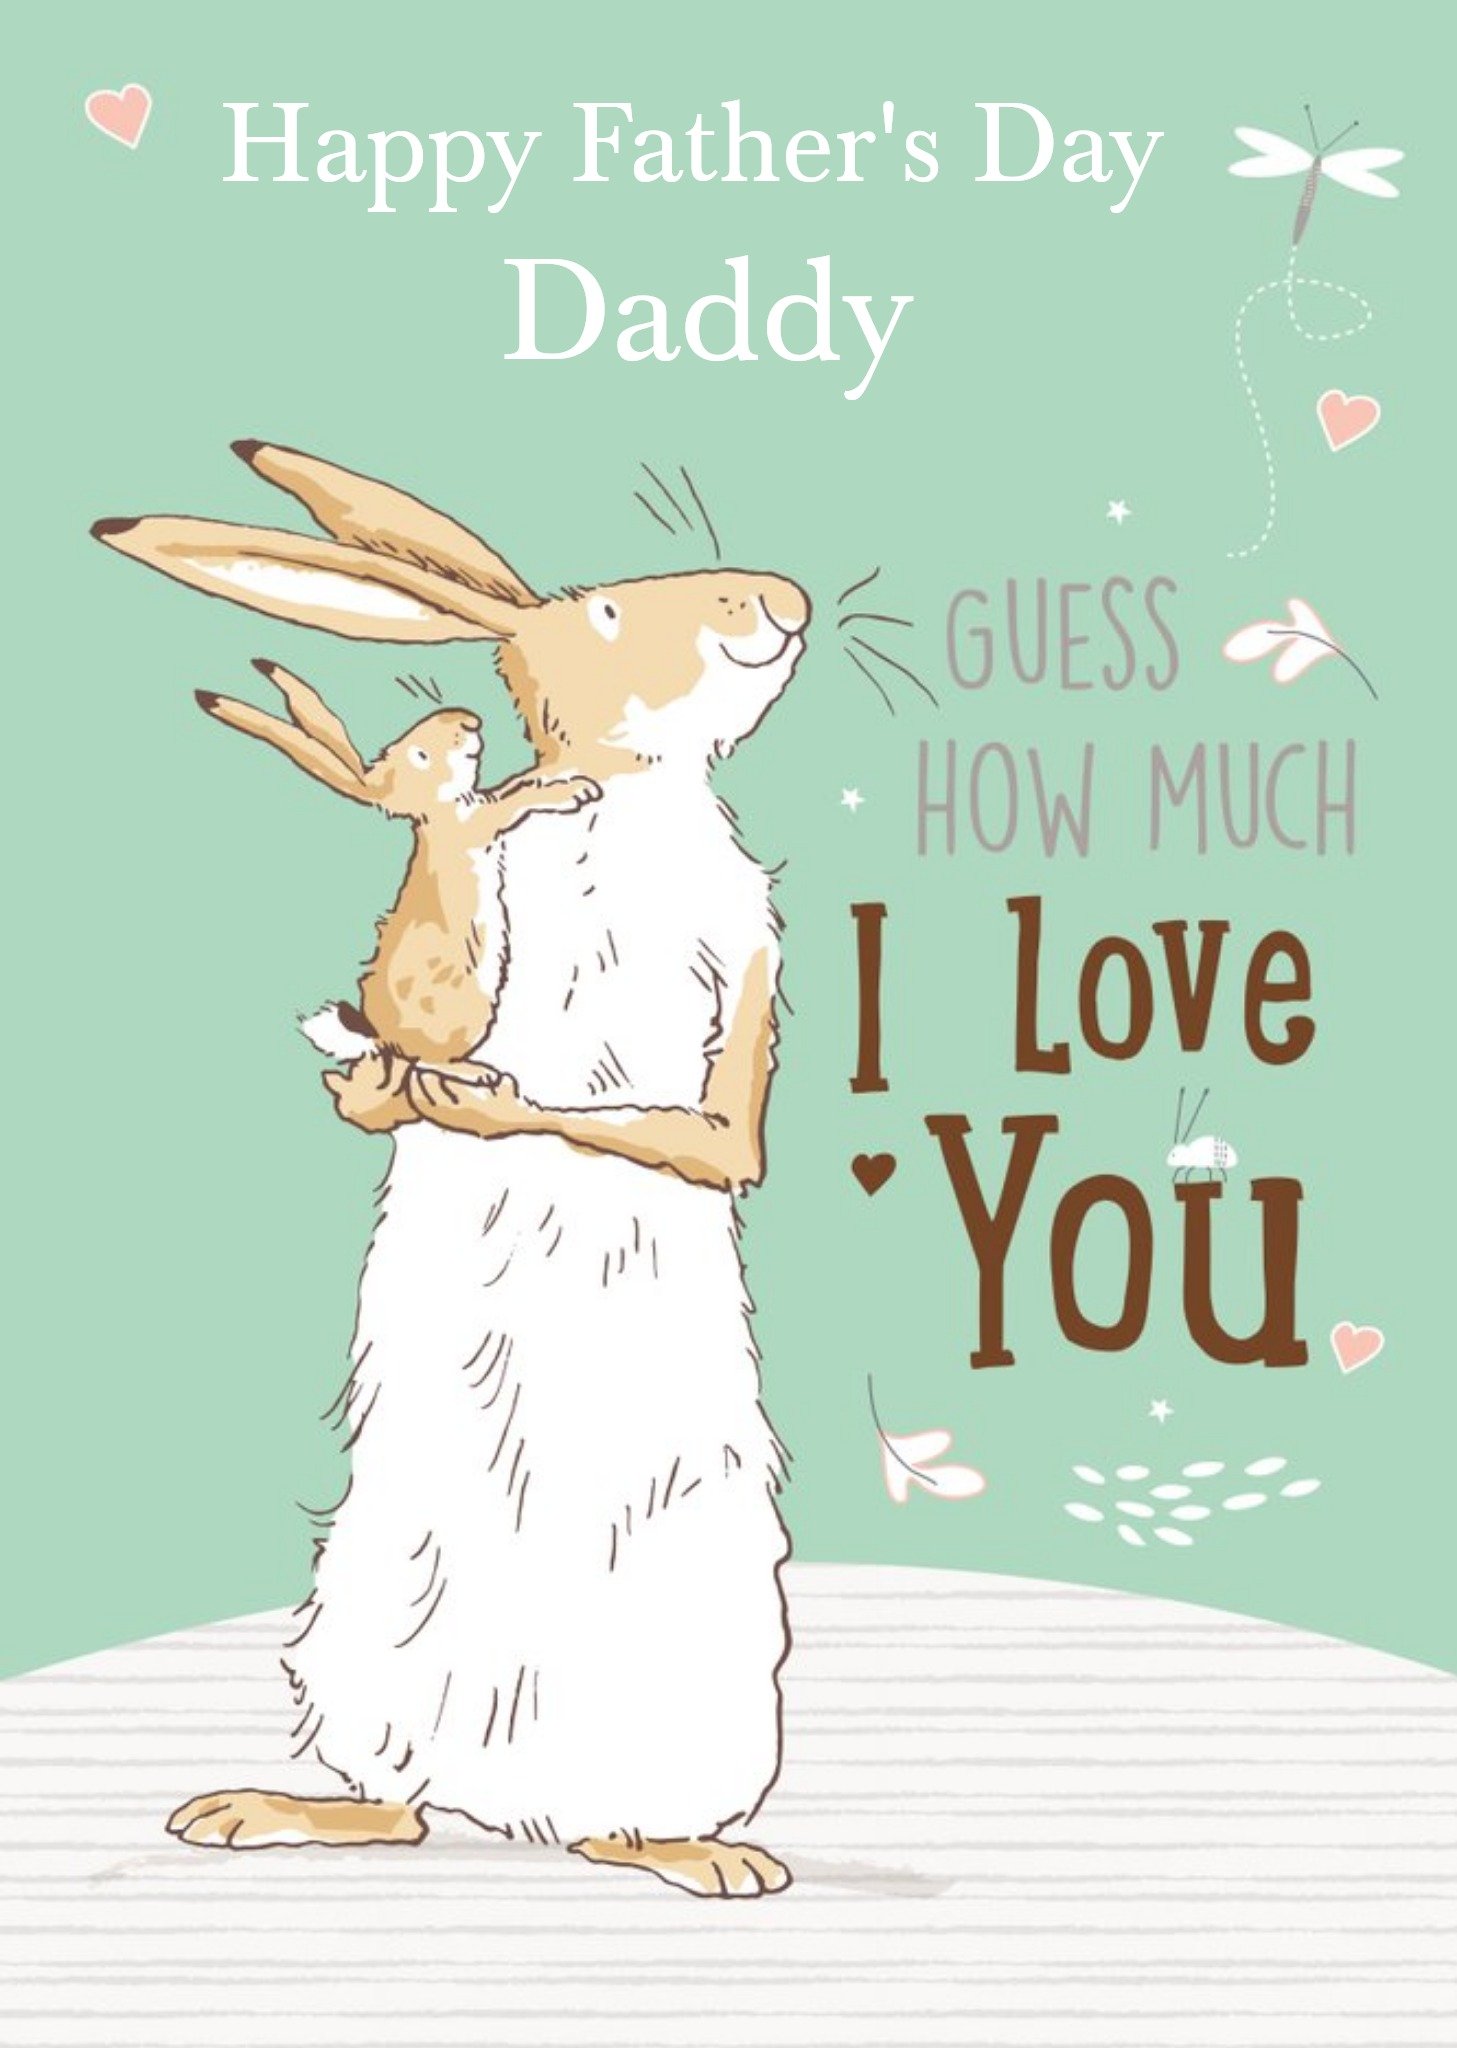 Guess How Much I Love You Danilo Ghmily Happy Father's Day Daddy Card, Large